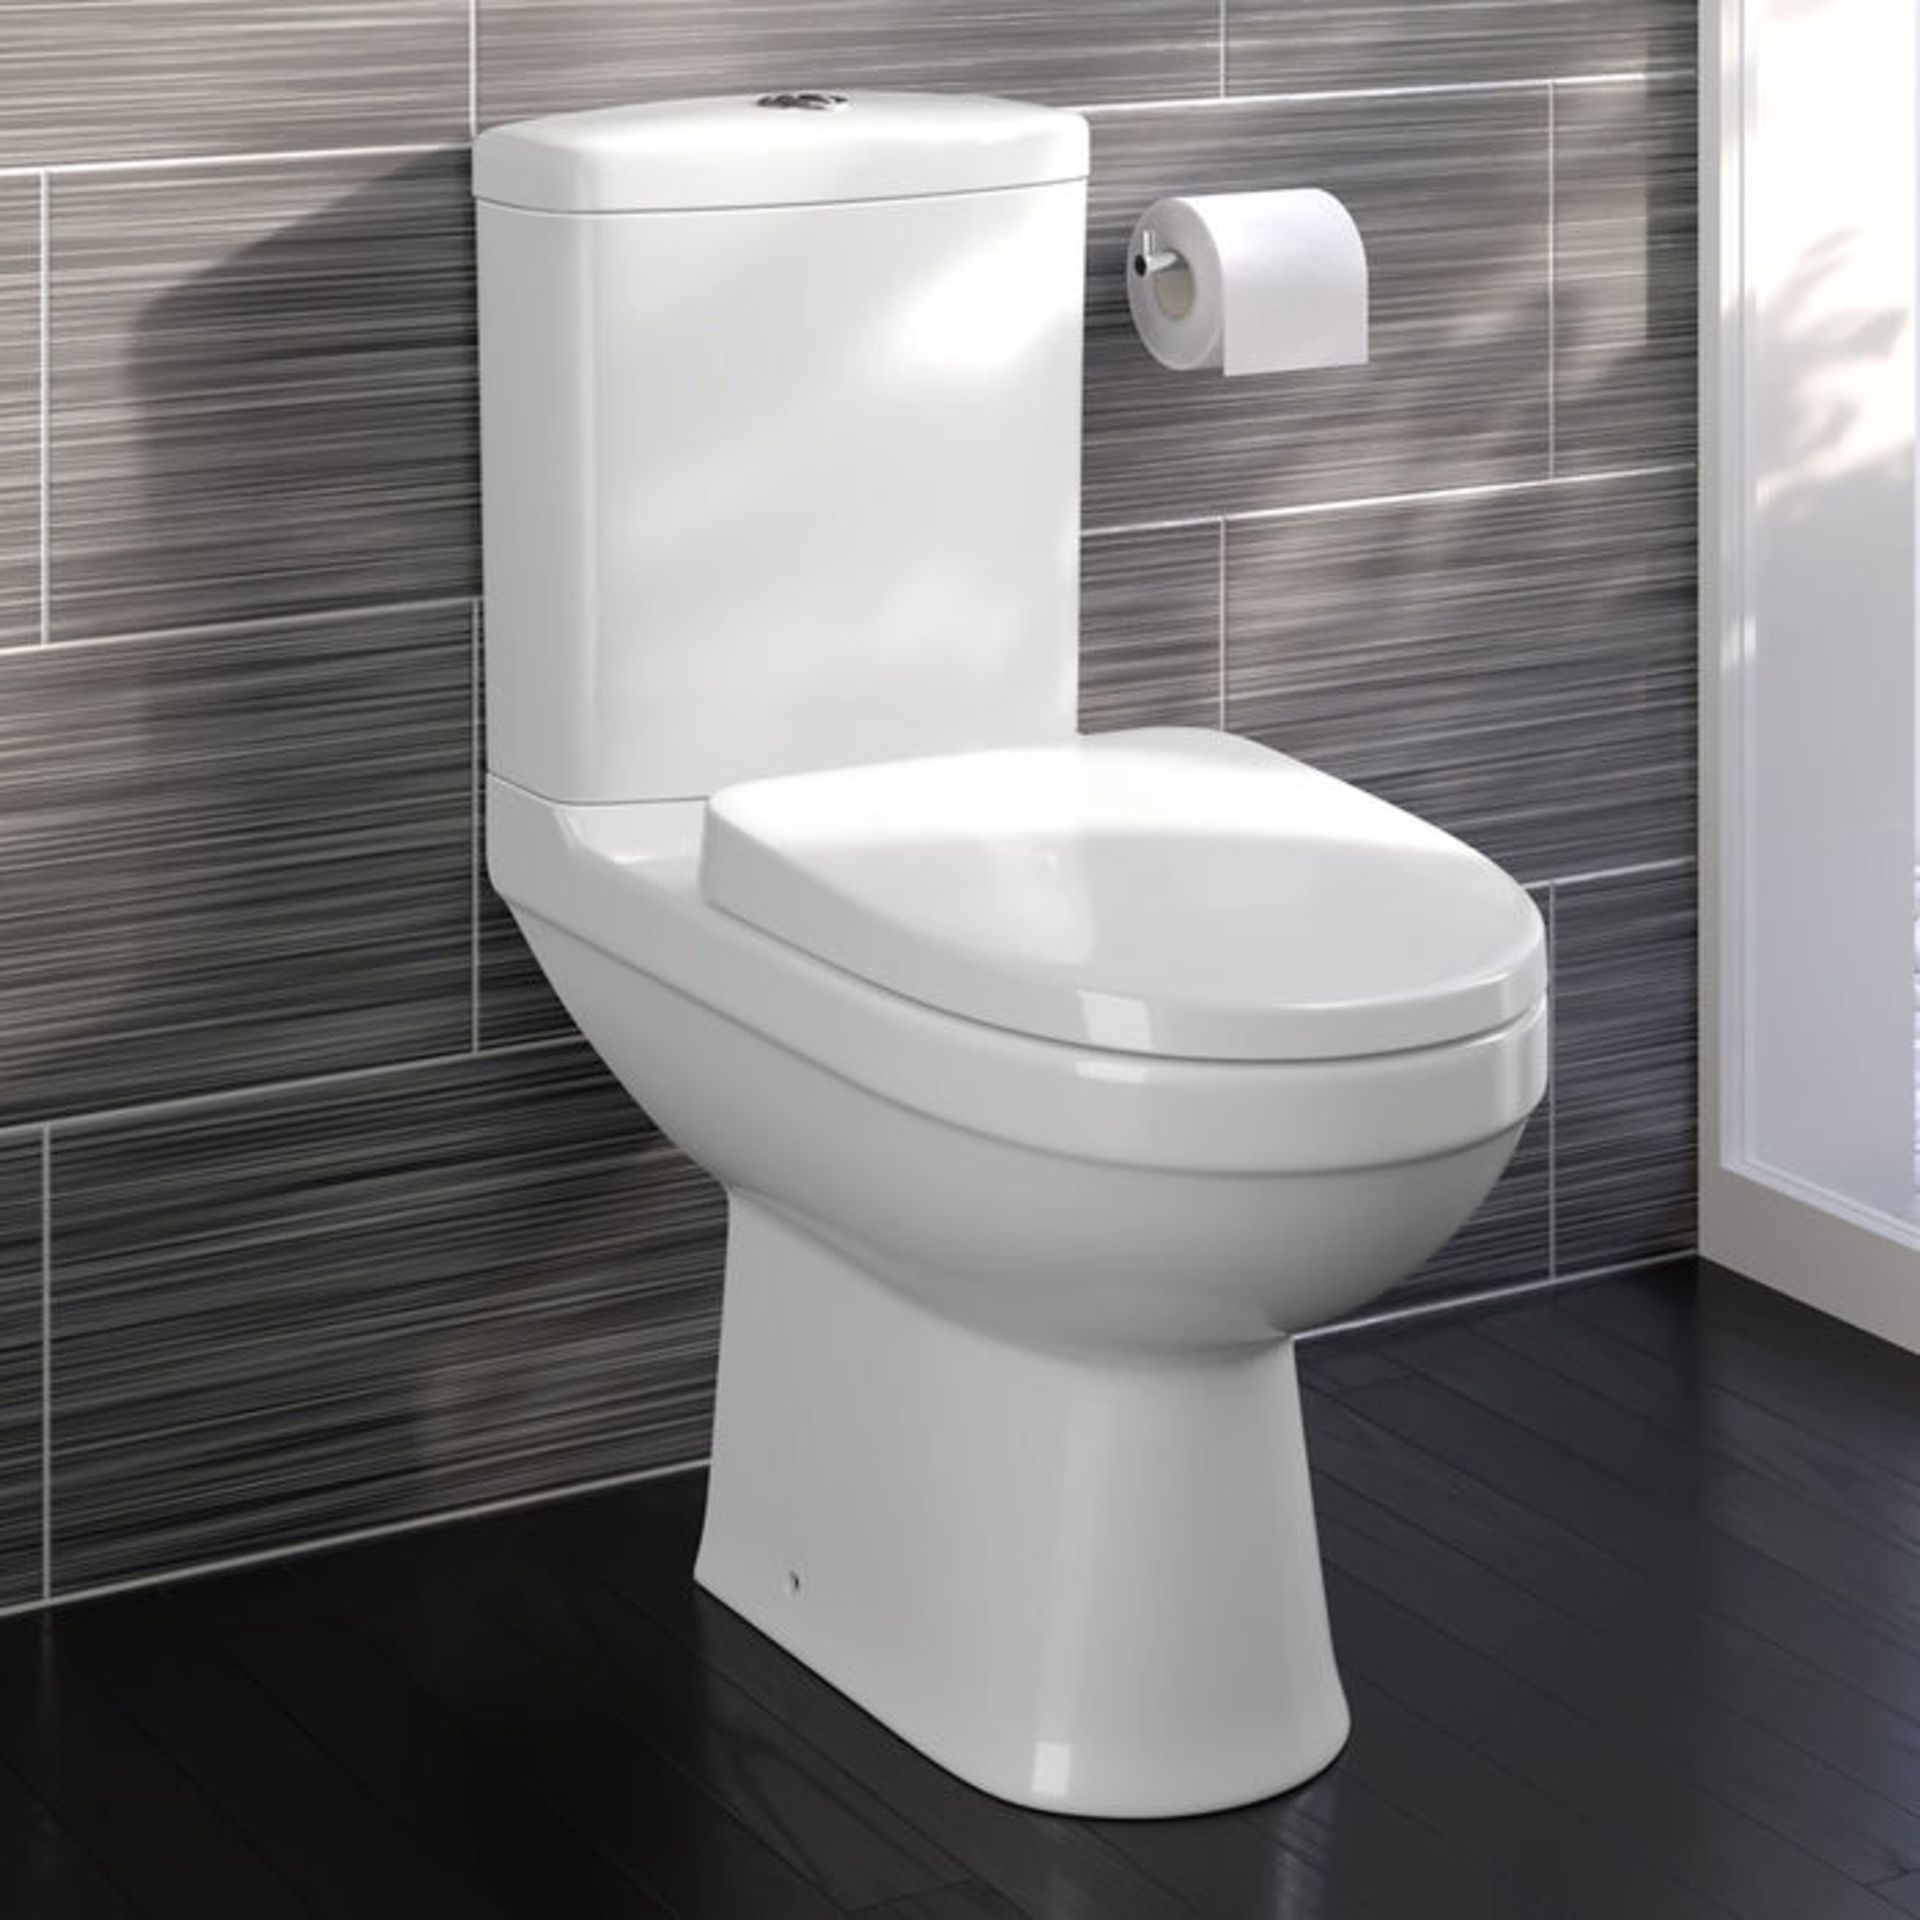 (P209) Sabrosa II Close Coupled Toilet & Cistern inc Soft Close Seat. Made from White Vitreous China